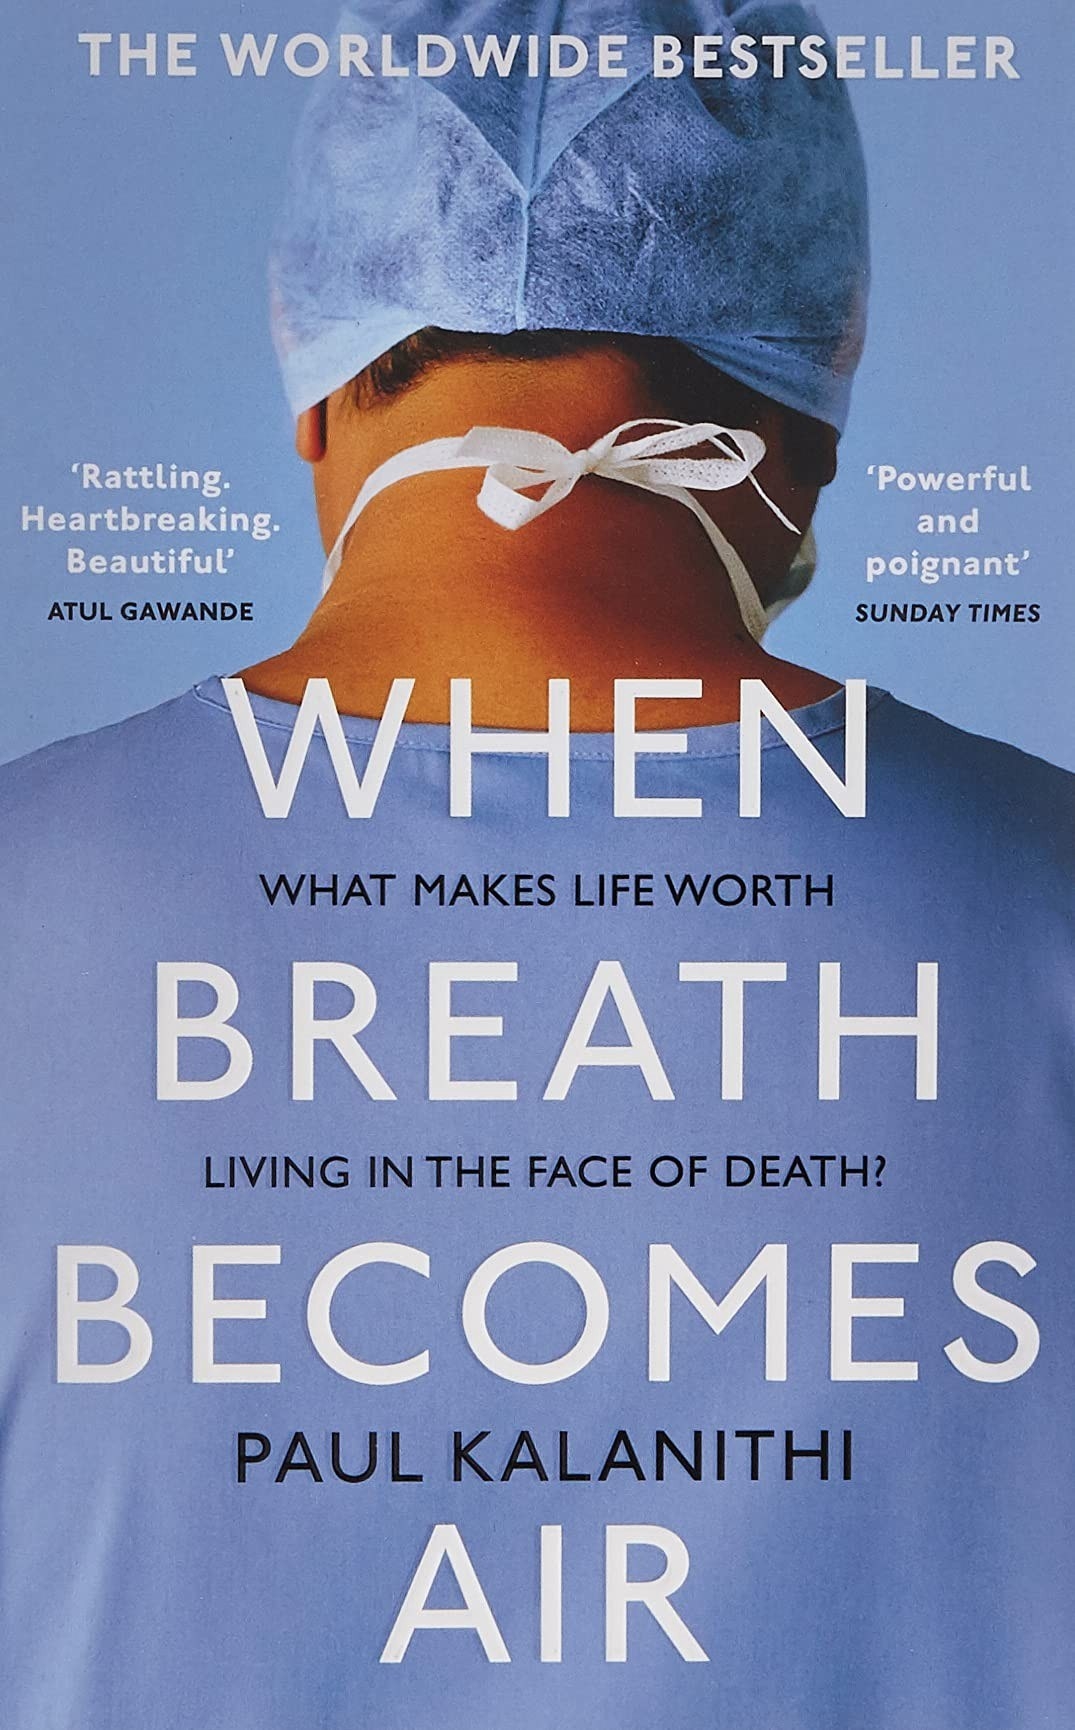 &quot;When Breath Becomes Air&quot; by Paul Kalanithi